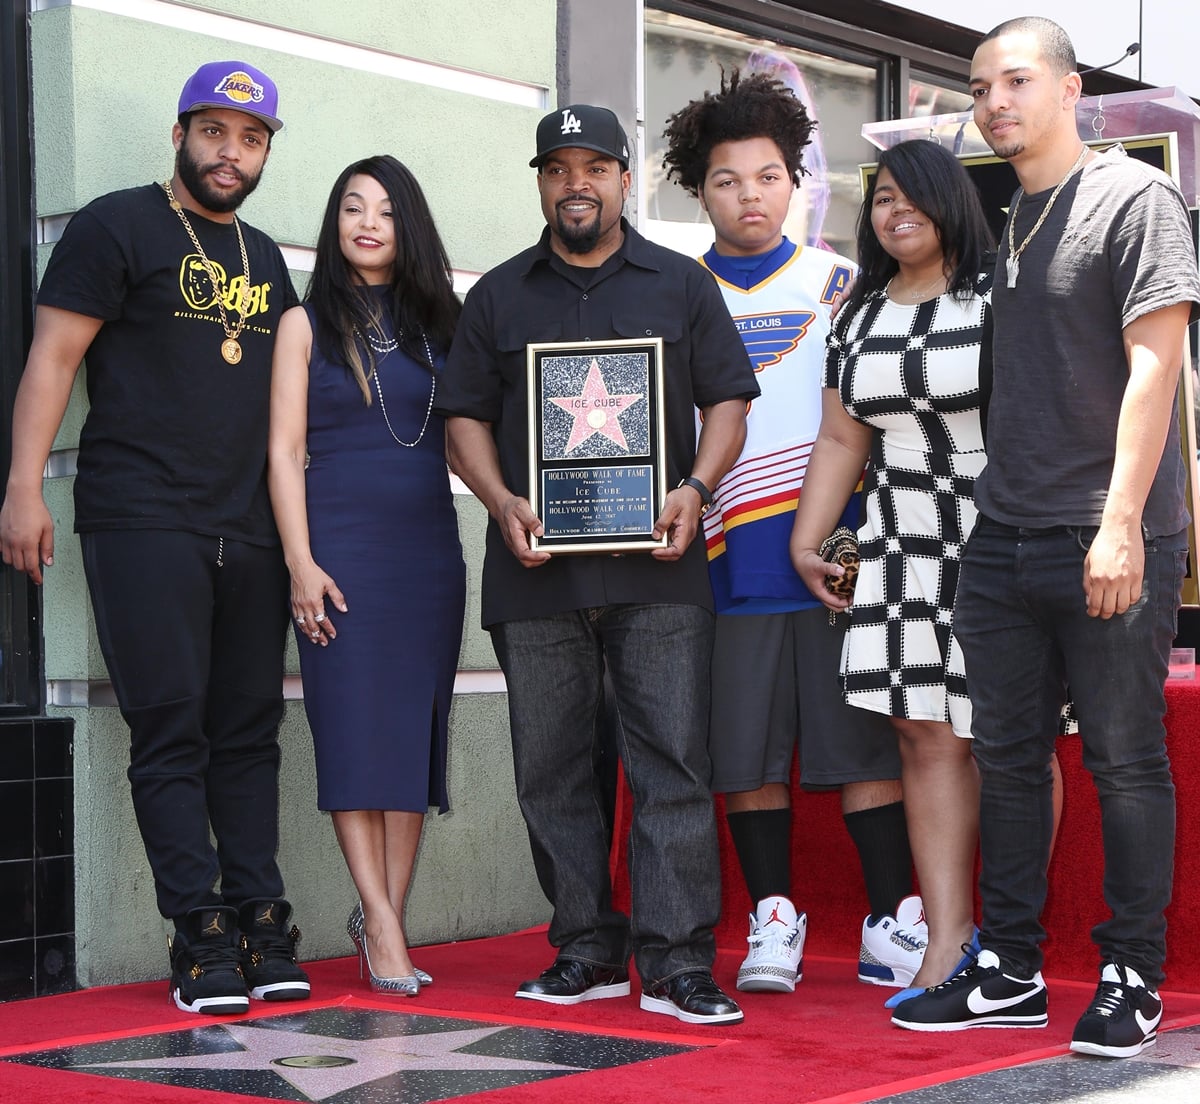 O'Shea Jackson Sr. with his wife Kimberly Woodruff and four of their five children, sons O’Shea Jackson Jr., Darrel, and Shareef, and daughter Kareema, at the ceremony honoring Ice Cube with a Star on The Hollywood Walk of Fame